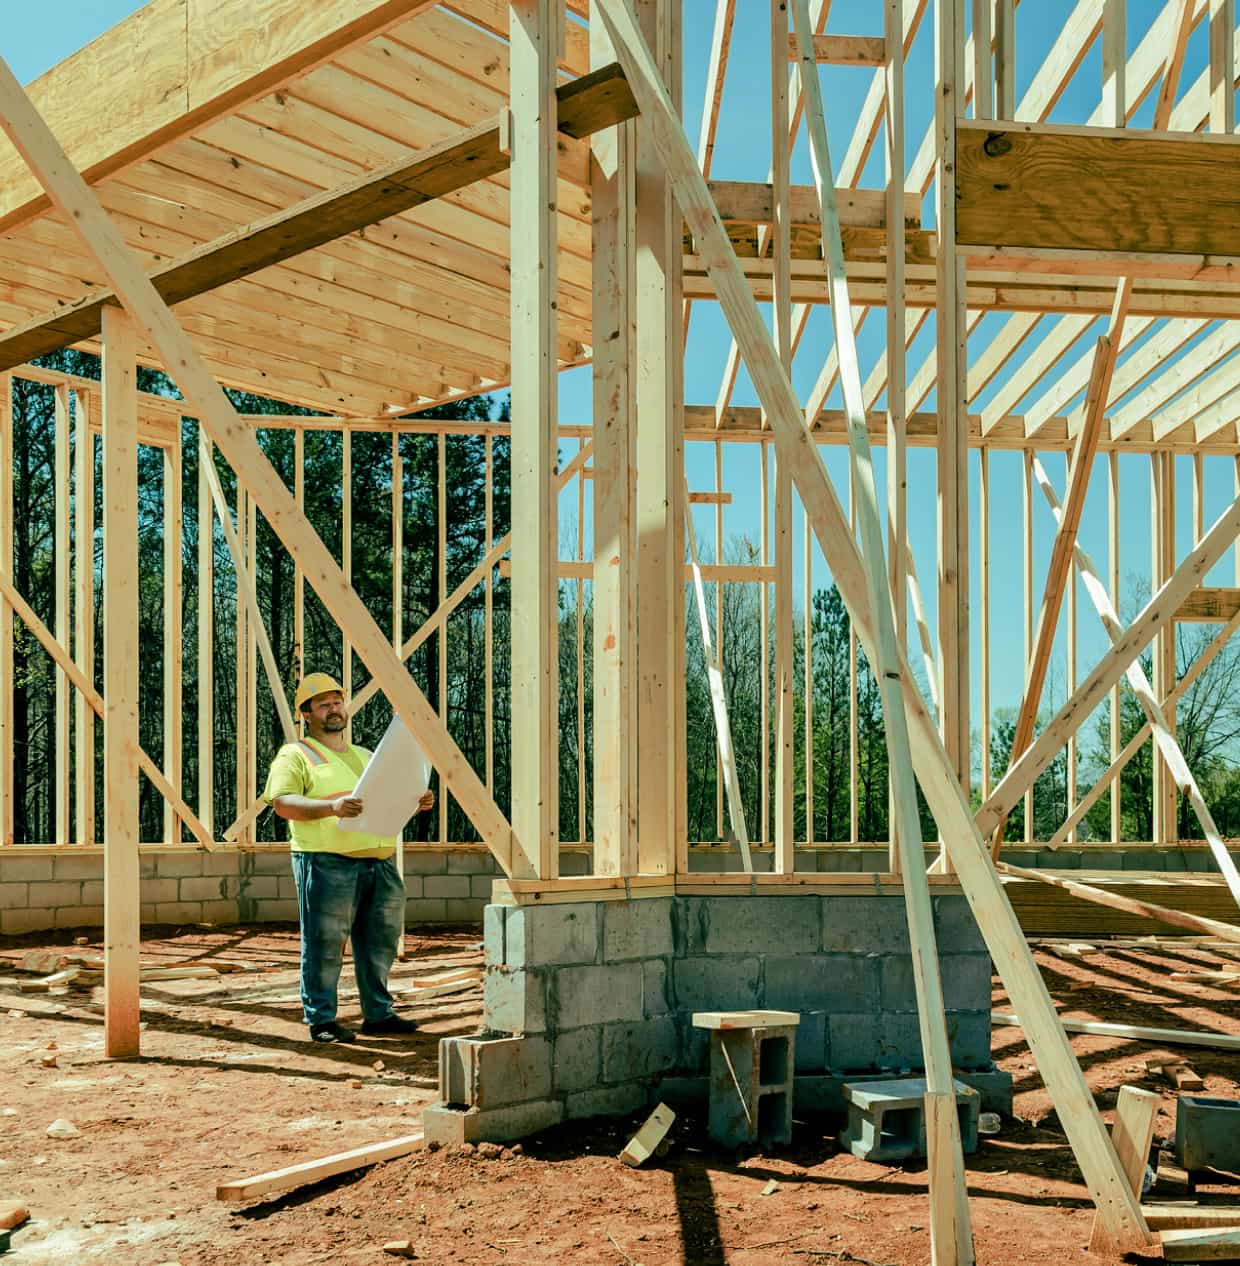 A construction worker in a reflective vest reviews plans in a partially framed building.